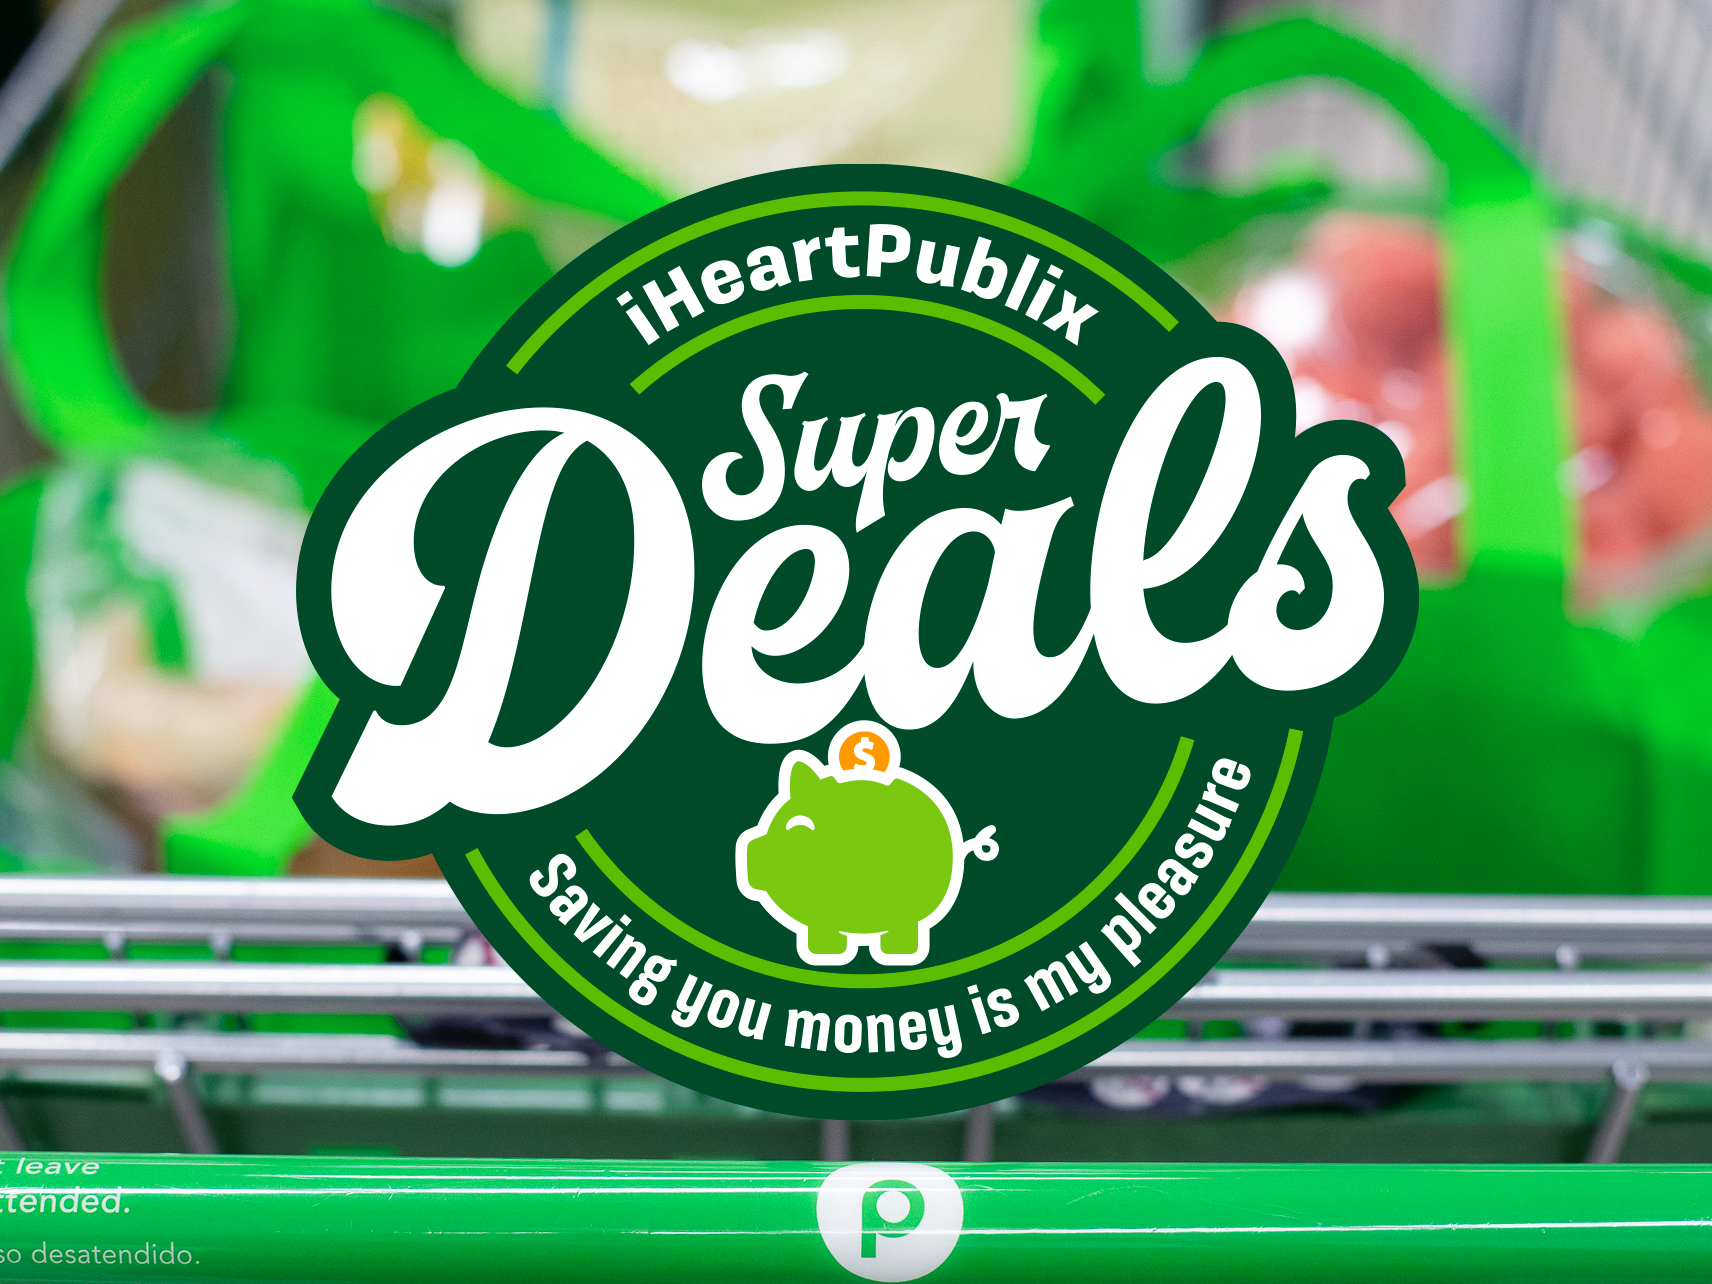 Publix Super Deals Week Of 11/17 to 11/23 (11/16 to 11/23 For Some)